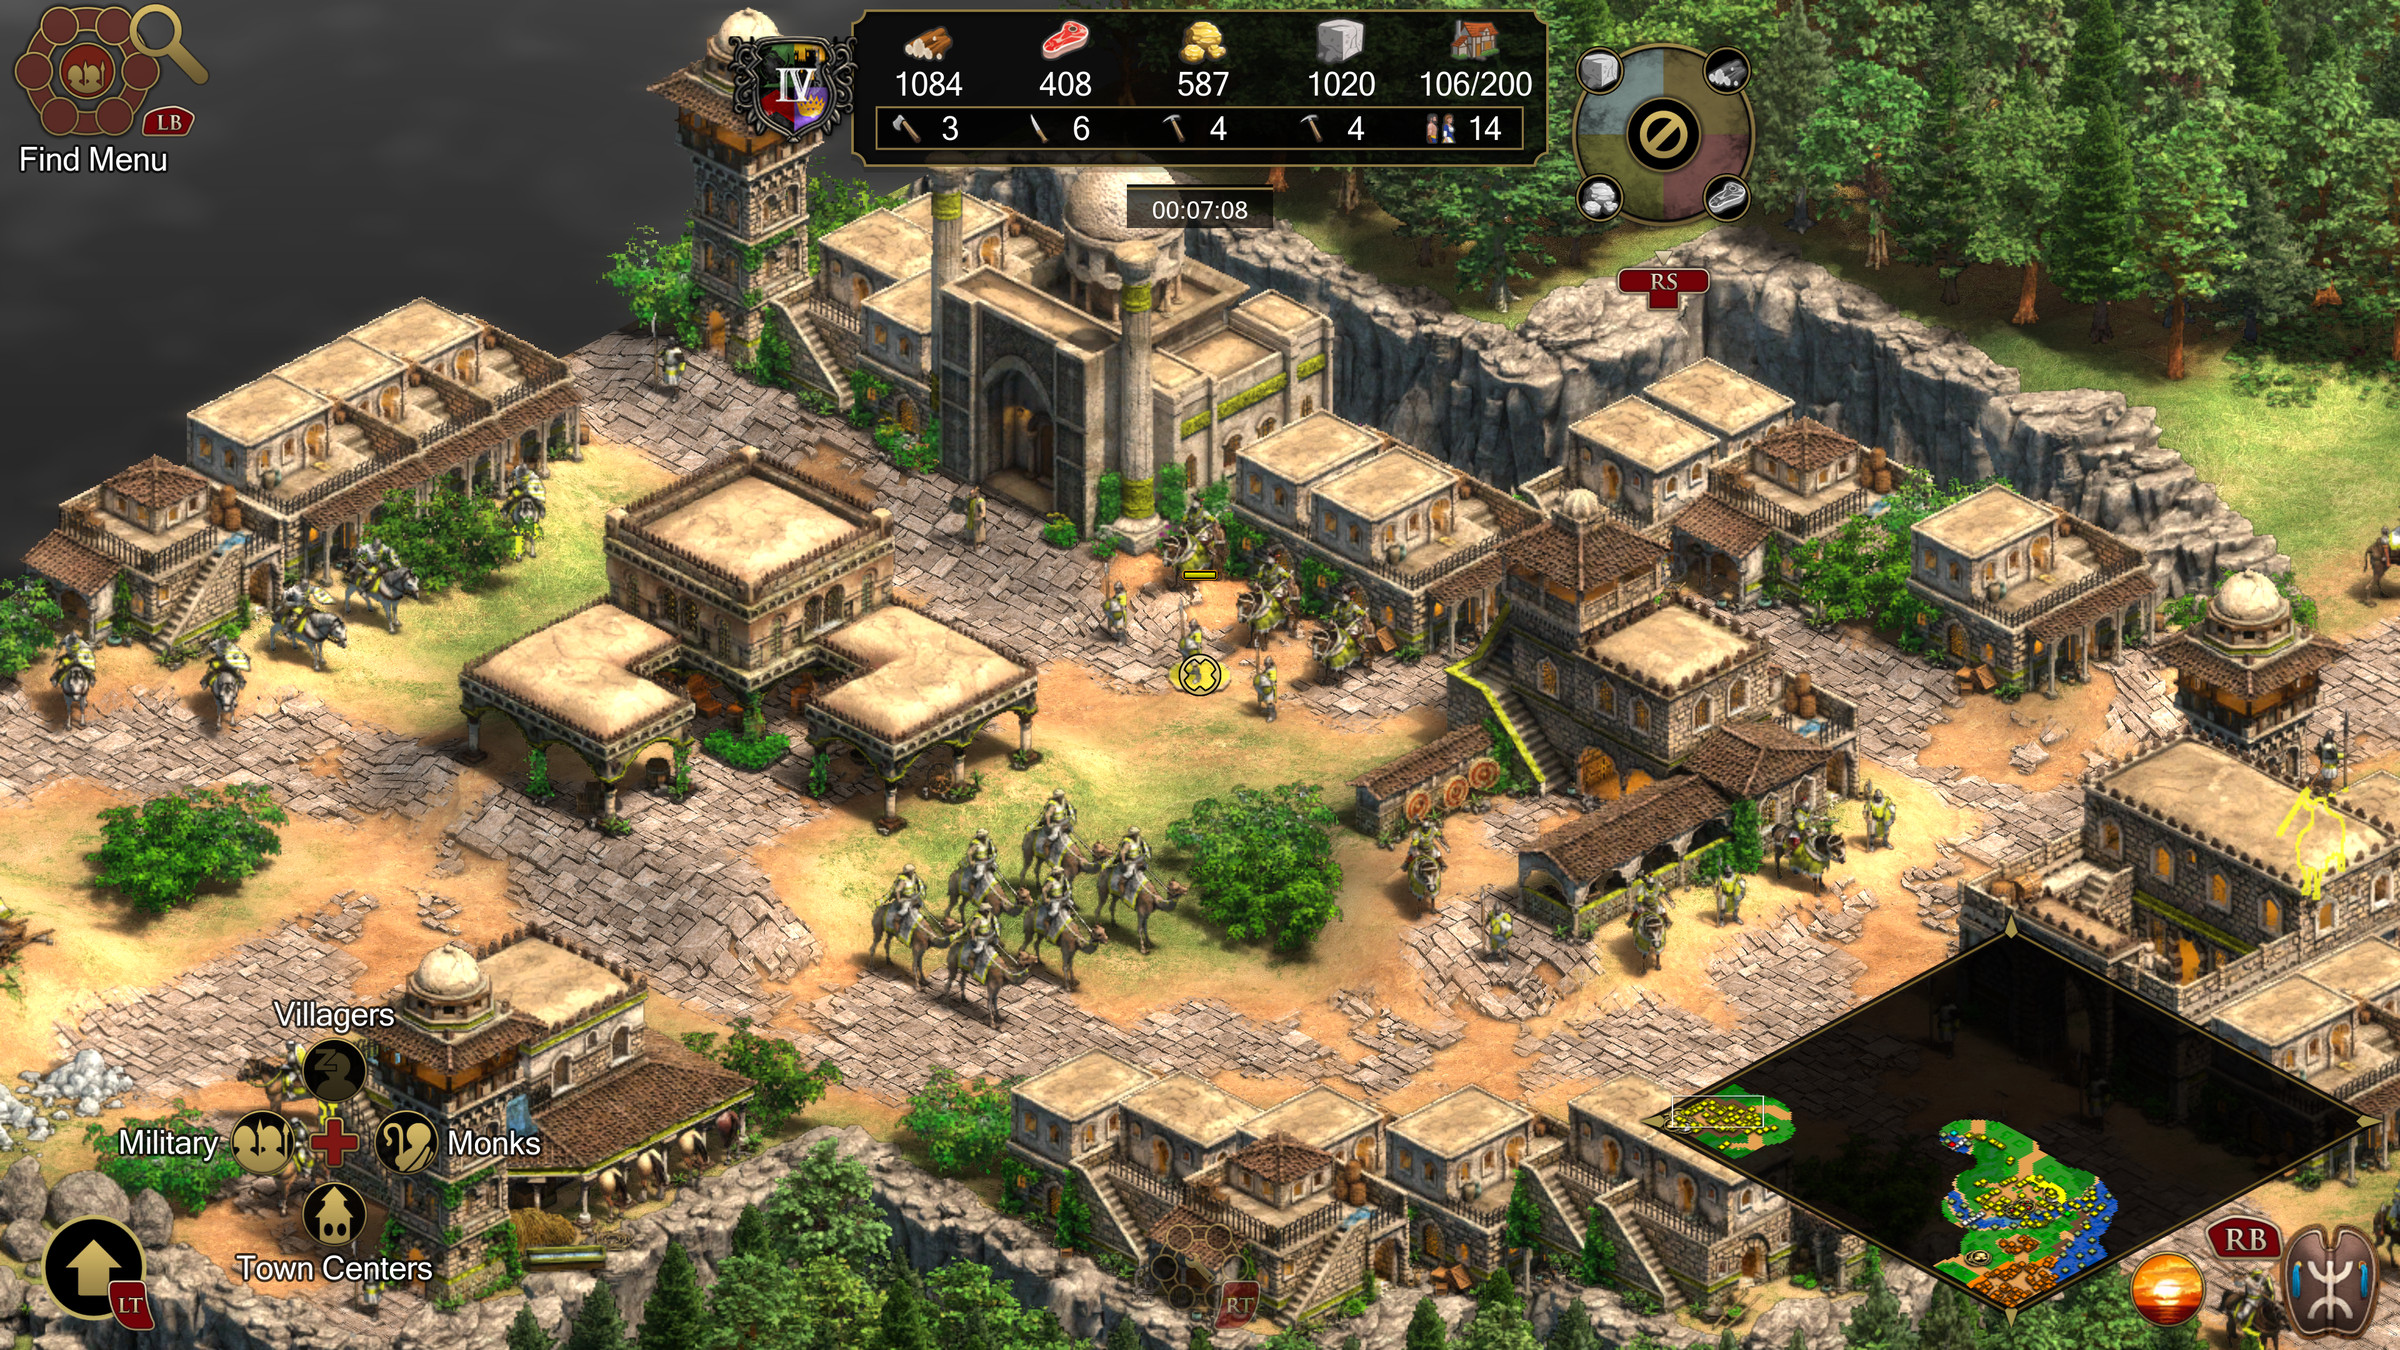 Screenshot of Age of Empires II: Definitive Edition showing the Berber civilization.